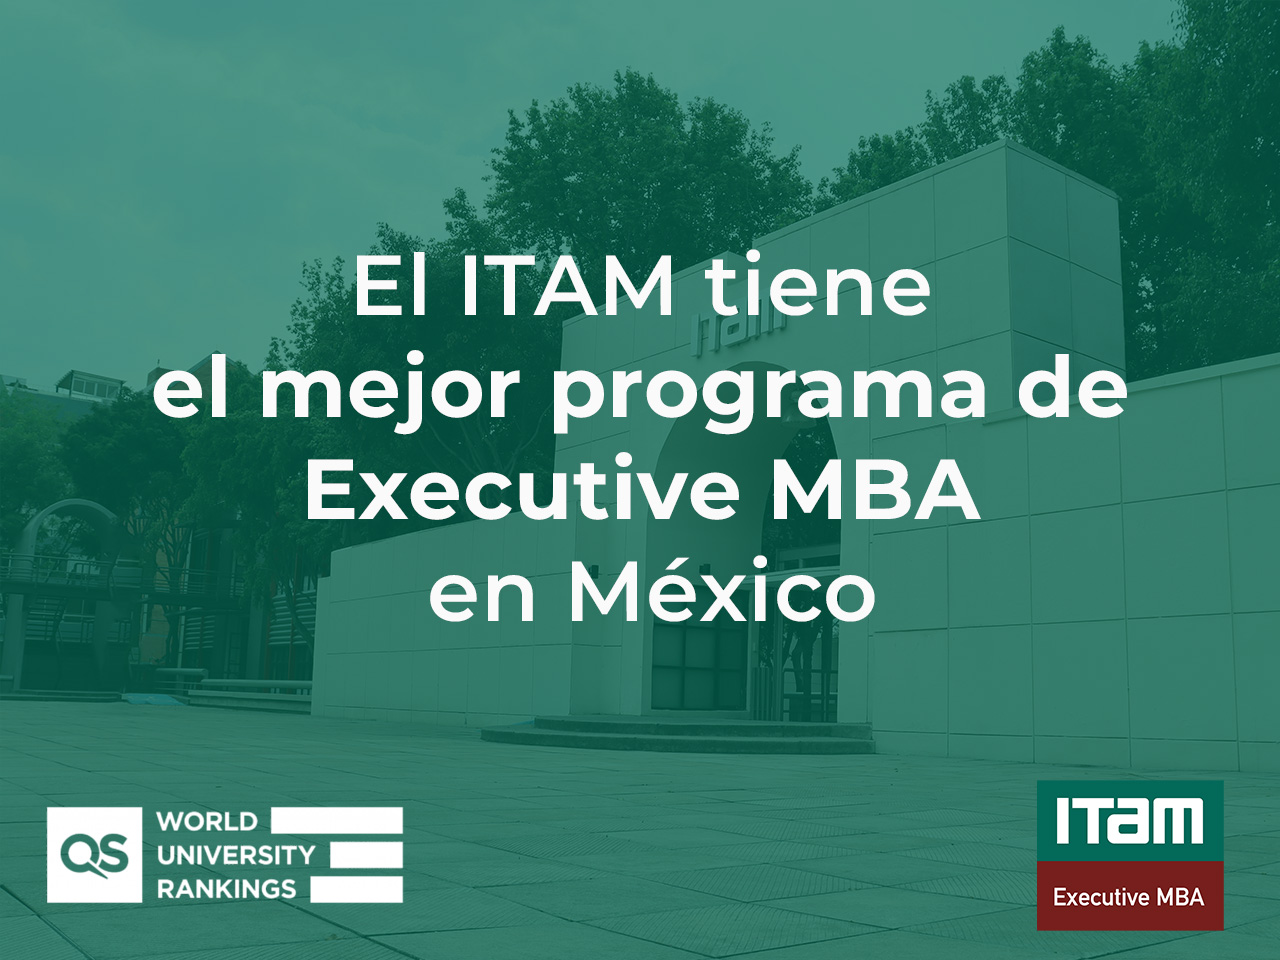 ITAM has the best Executive MBA Program in Mexico